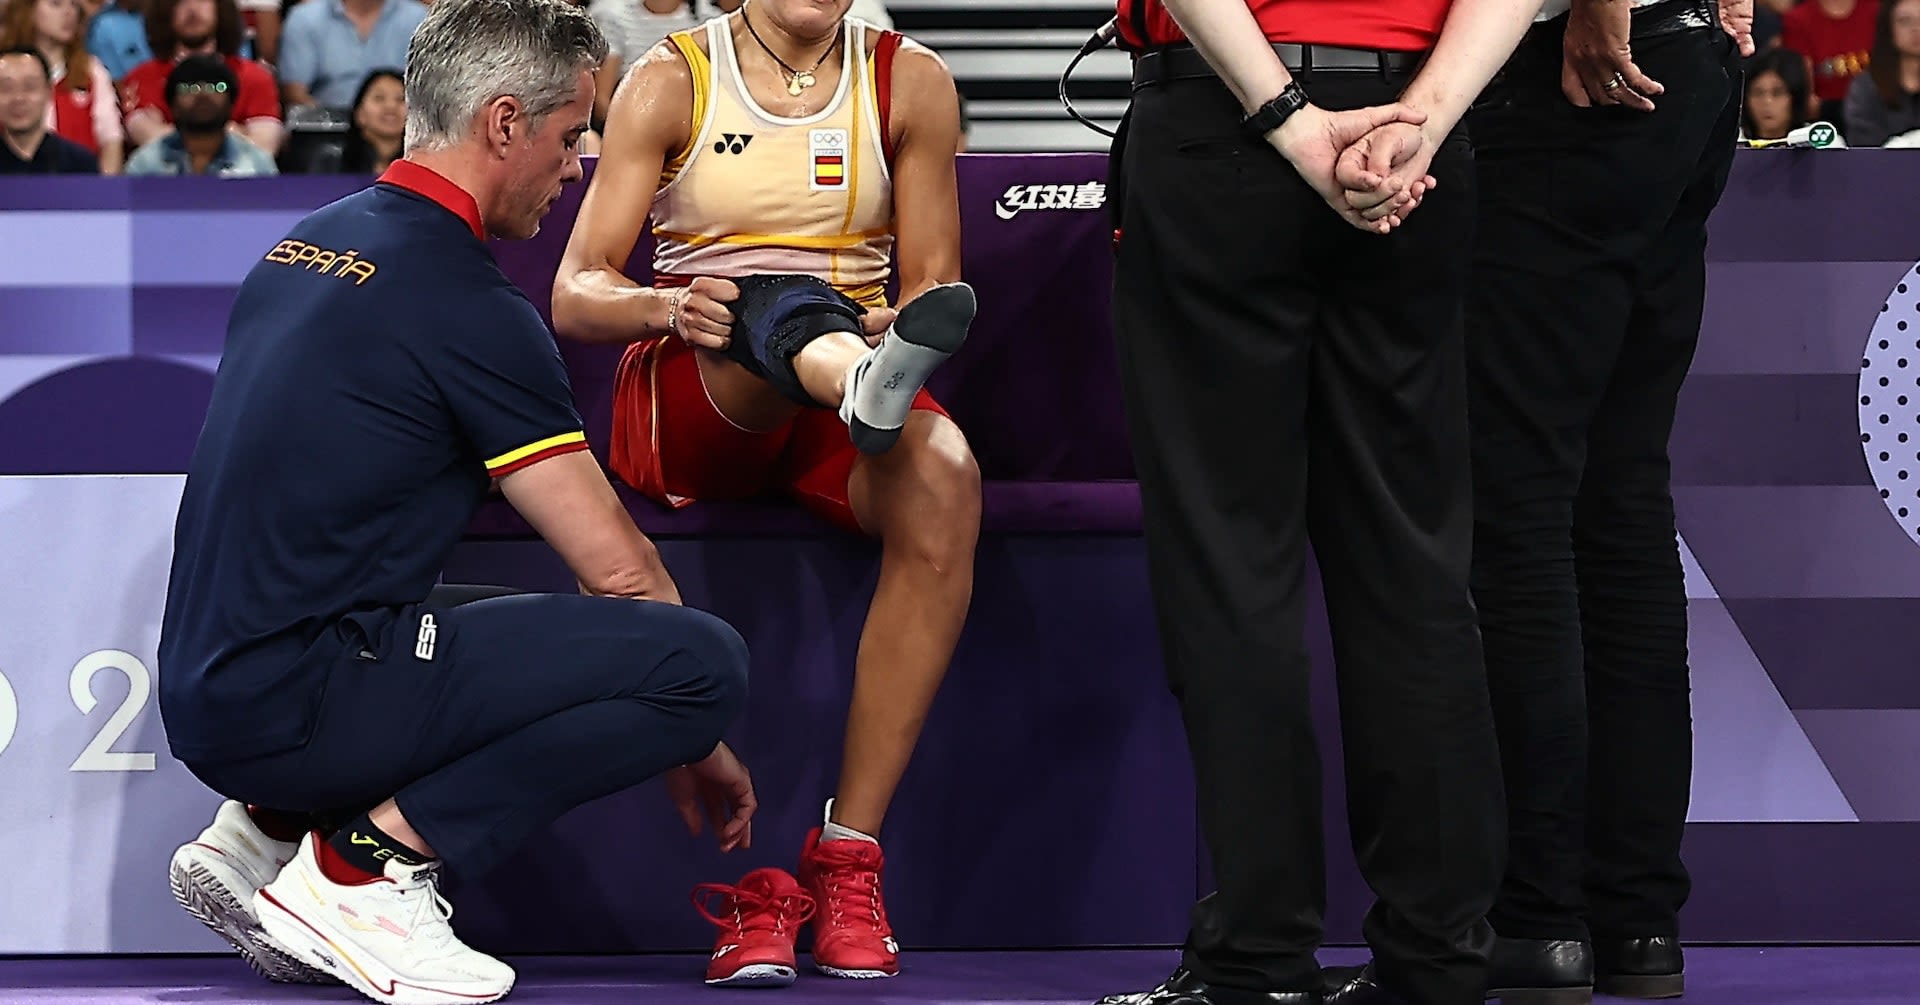 Badminton-Spain's Marin retires during semi-final with knee injury